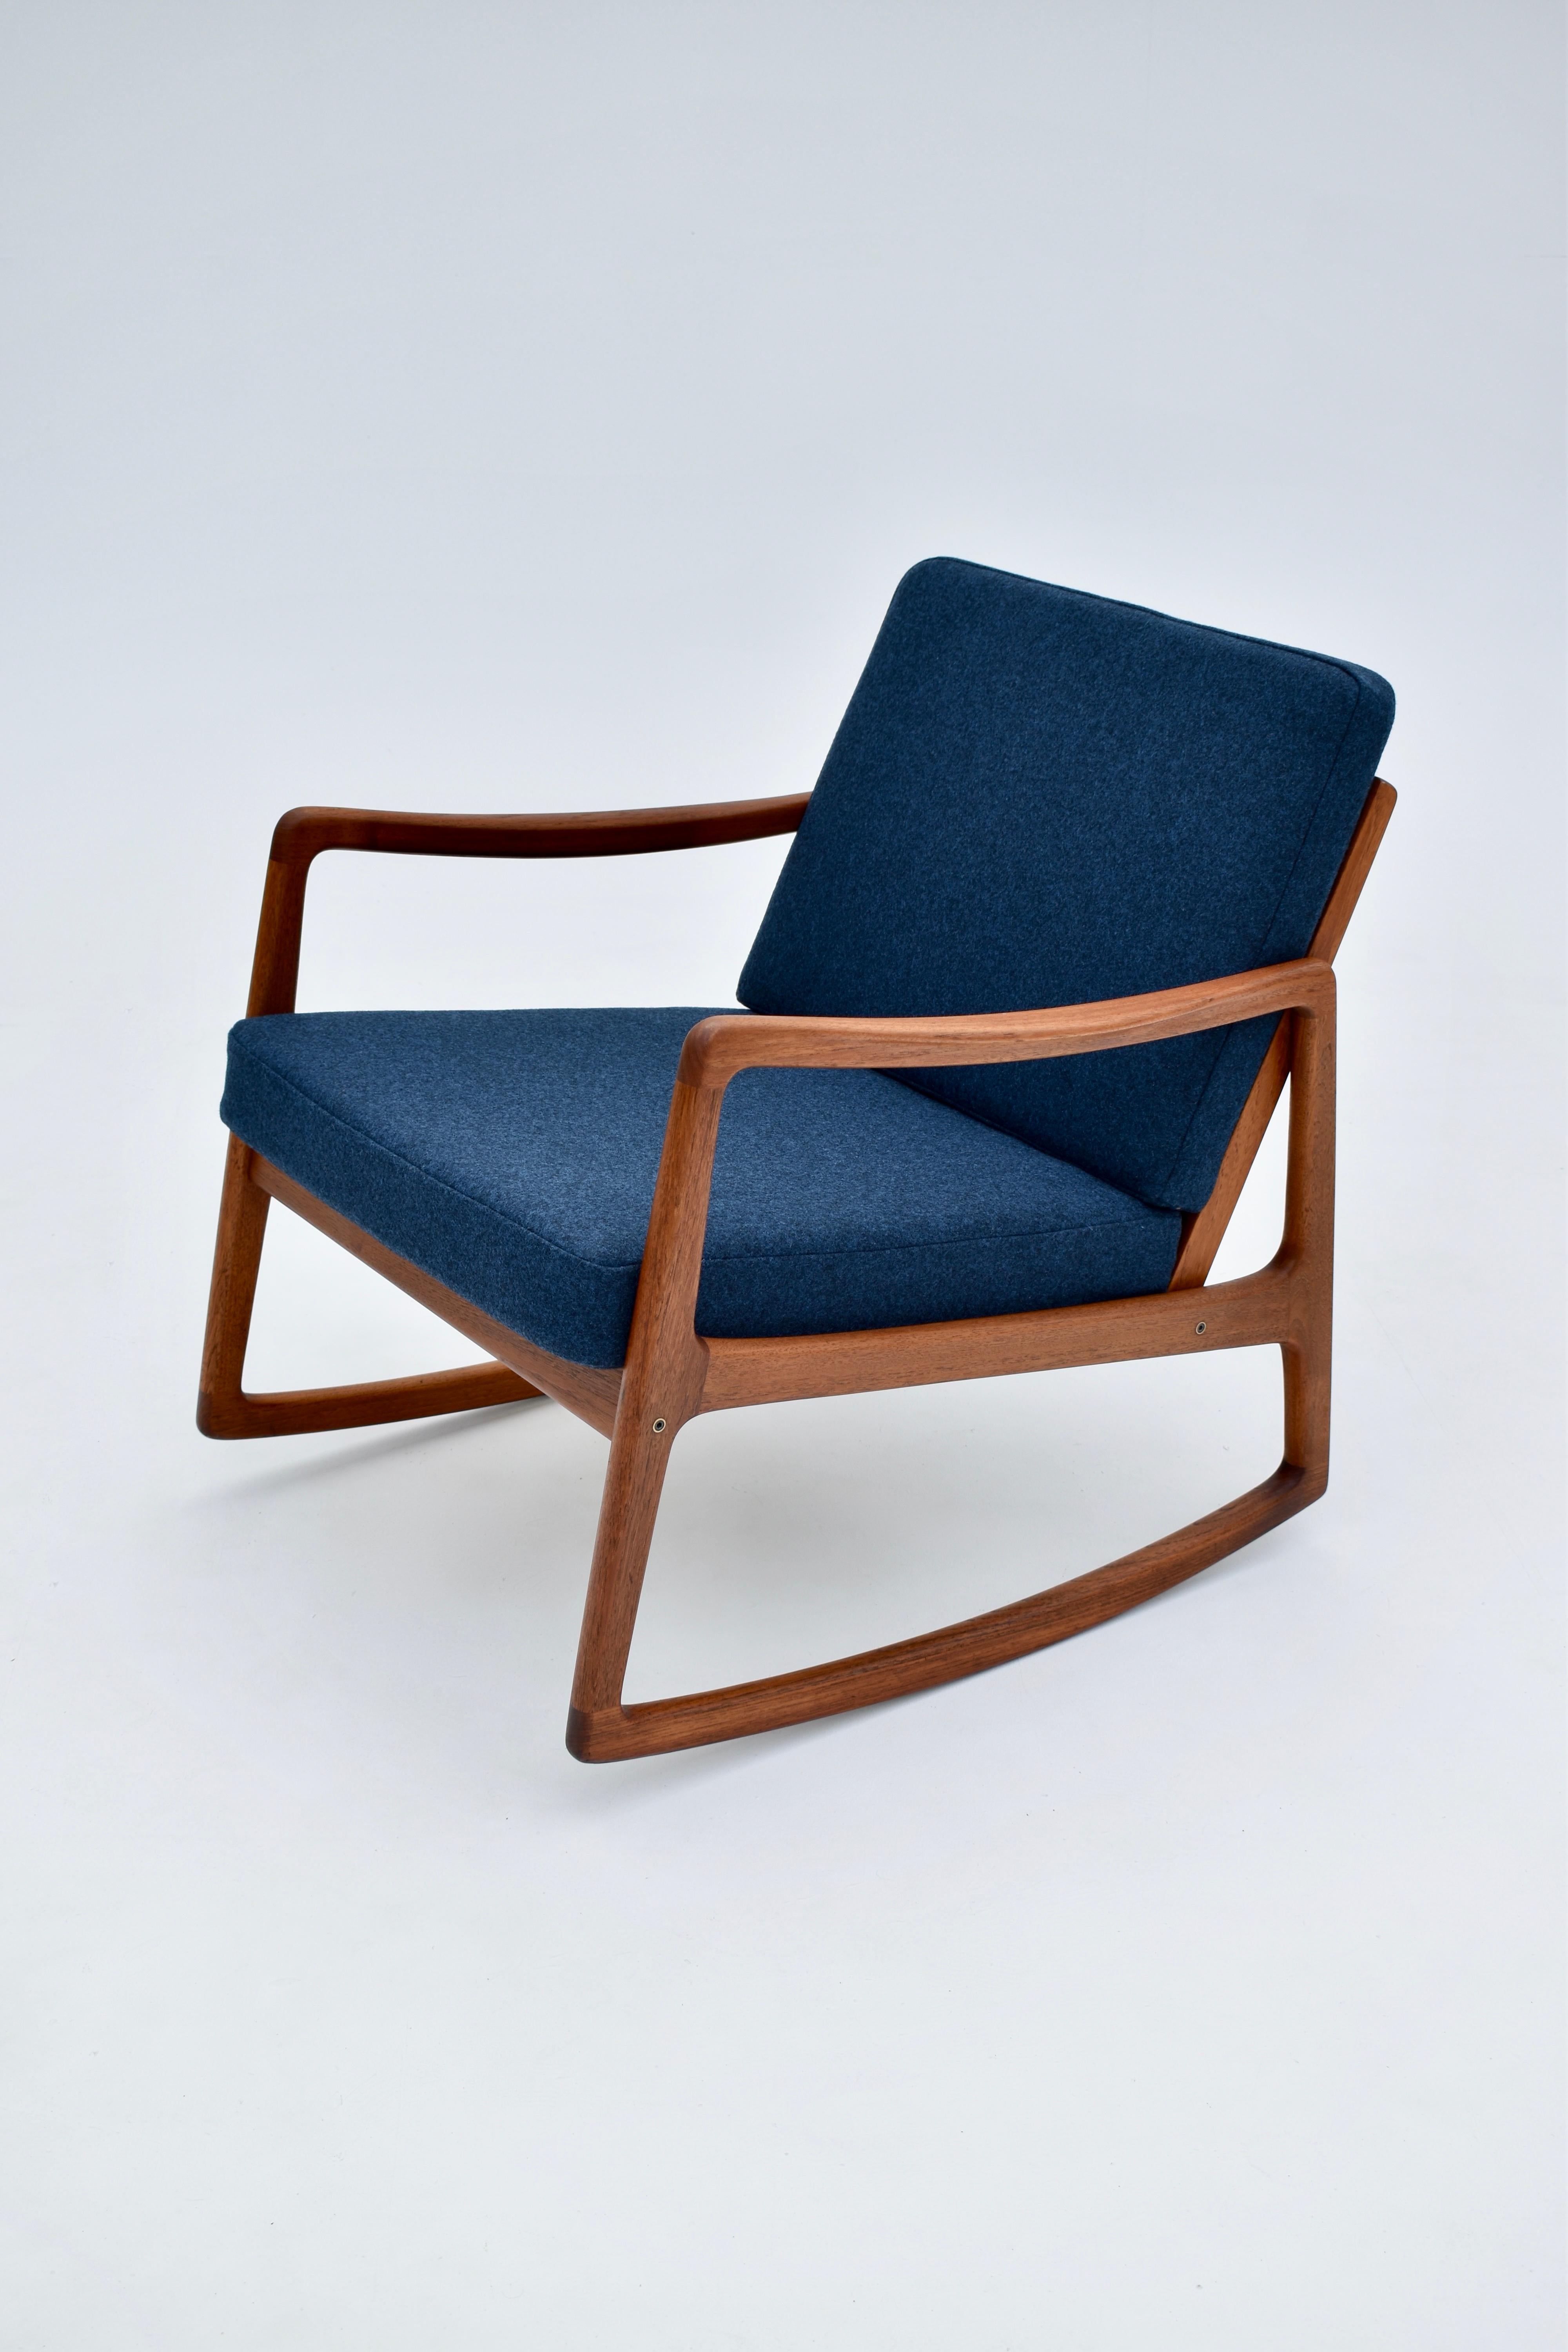 A superb and hard to find teak rocking chair designed by Ole Wanscher for France & Son, Denmark.

An absolute triumph of a design, the slenderness of the frame is remarkable and there is not a line out of place, this has always been one of our